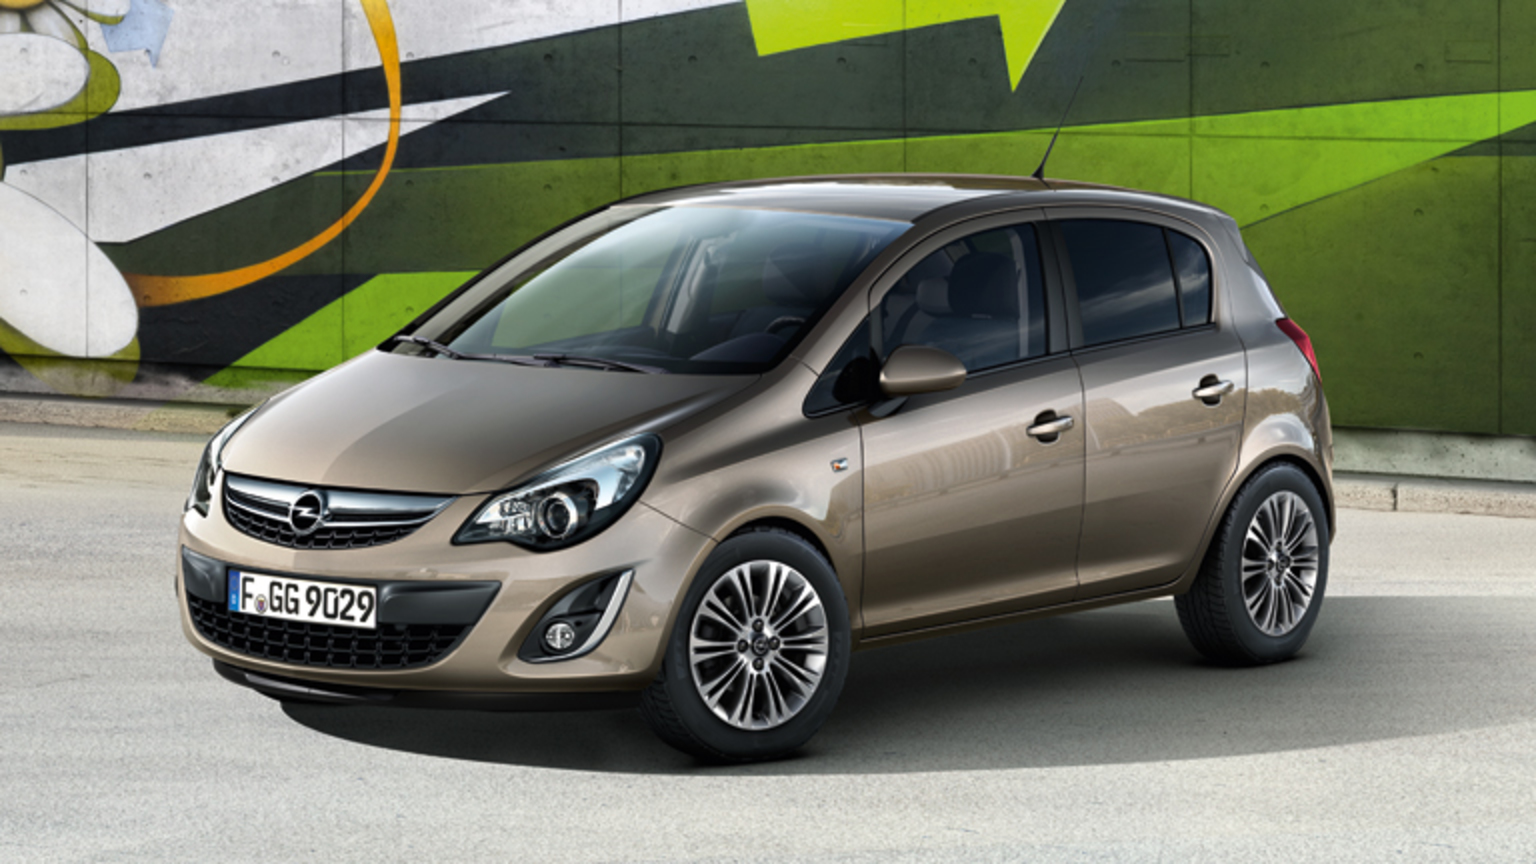 The Opel Corsa comes with a petrol engine that gives sparkling performance